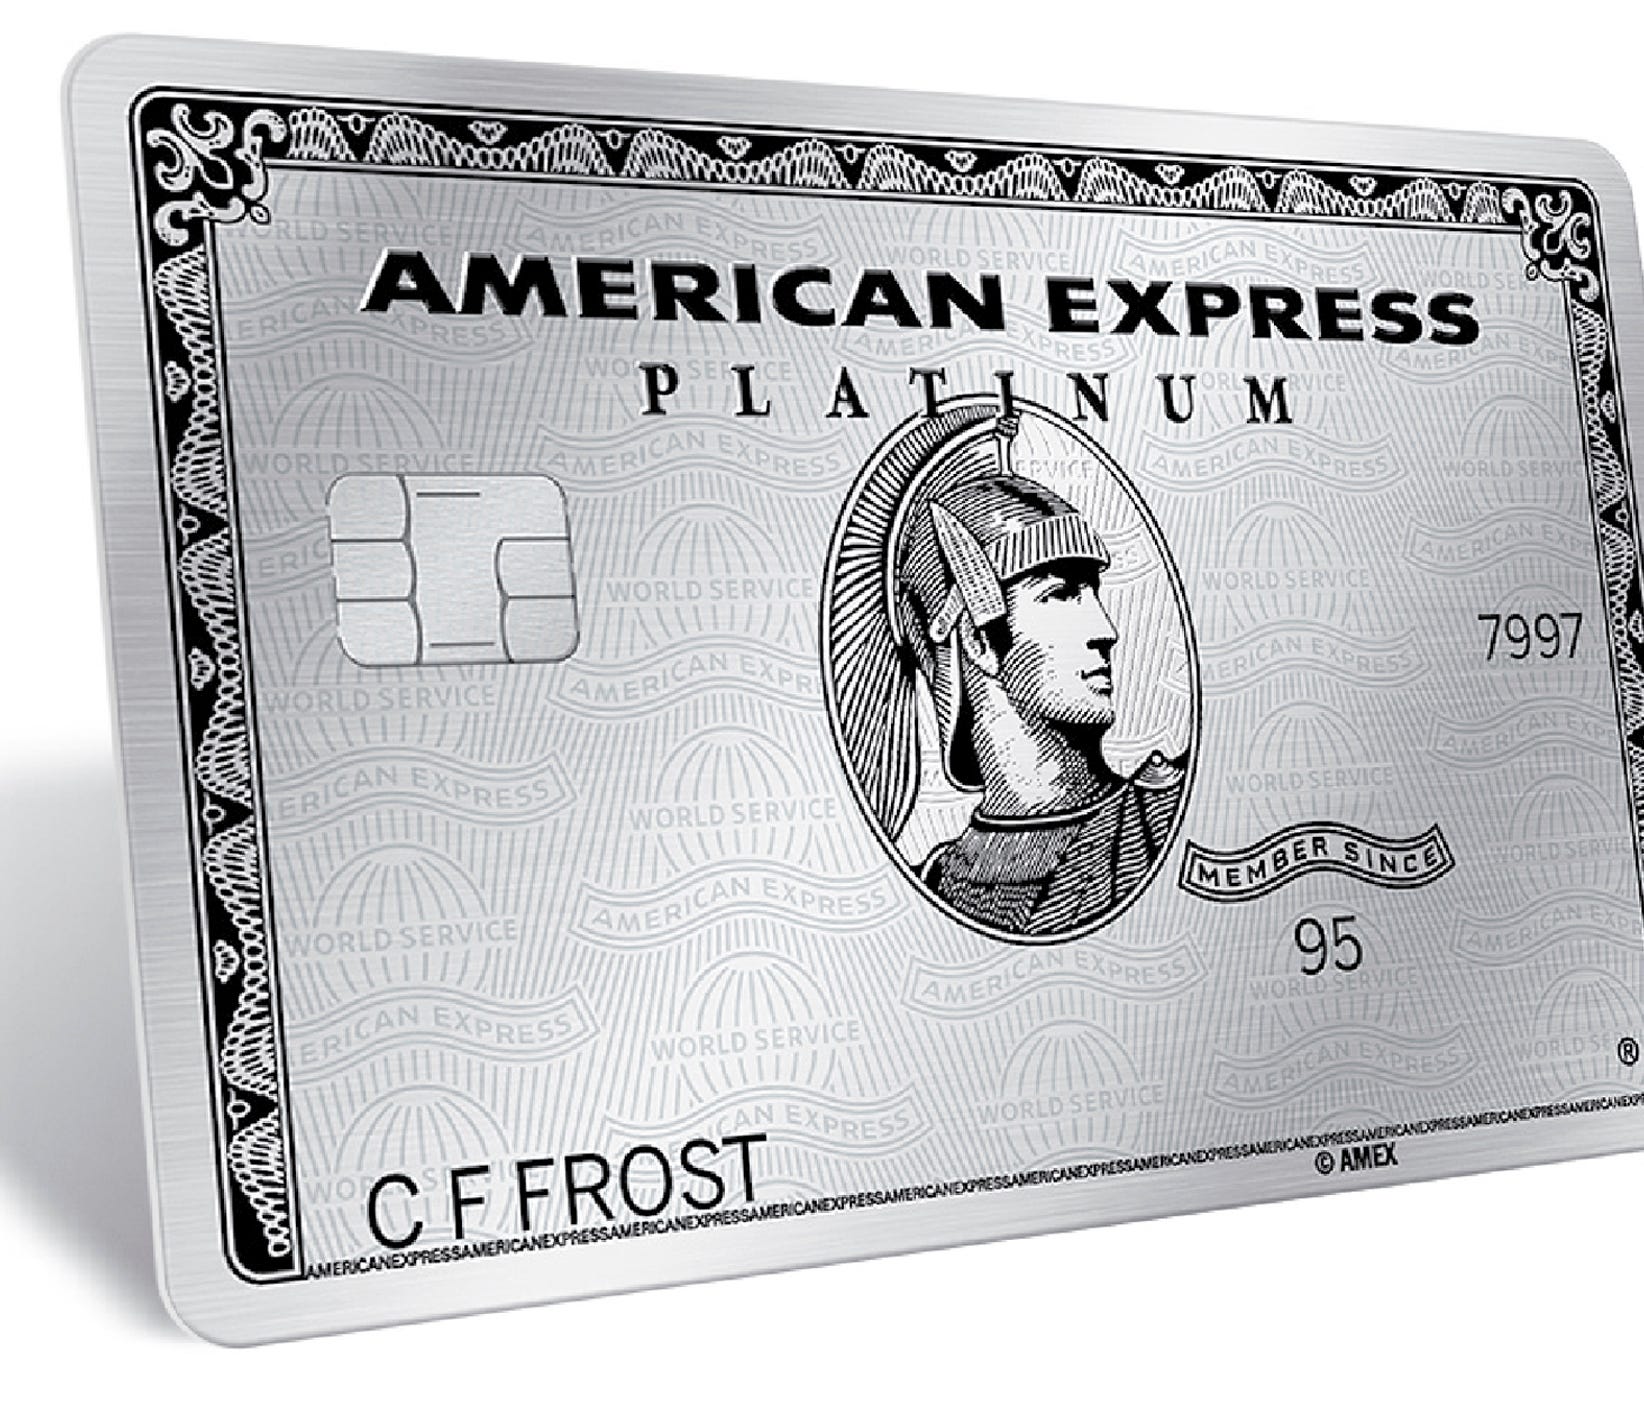 Handout image provided by American Express shows the company's redesigned Platinum Card.